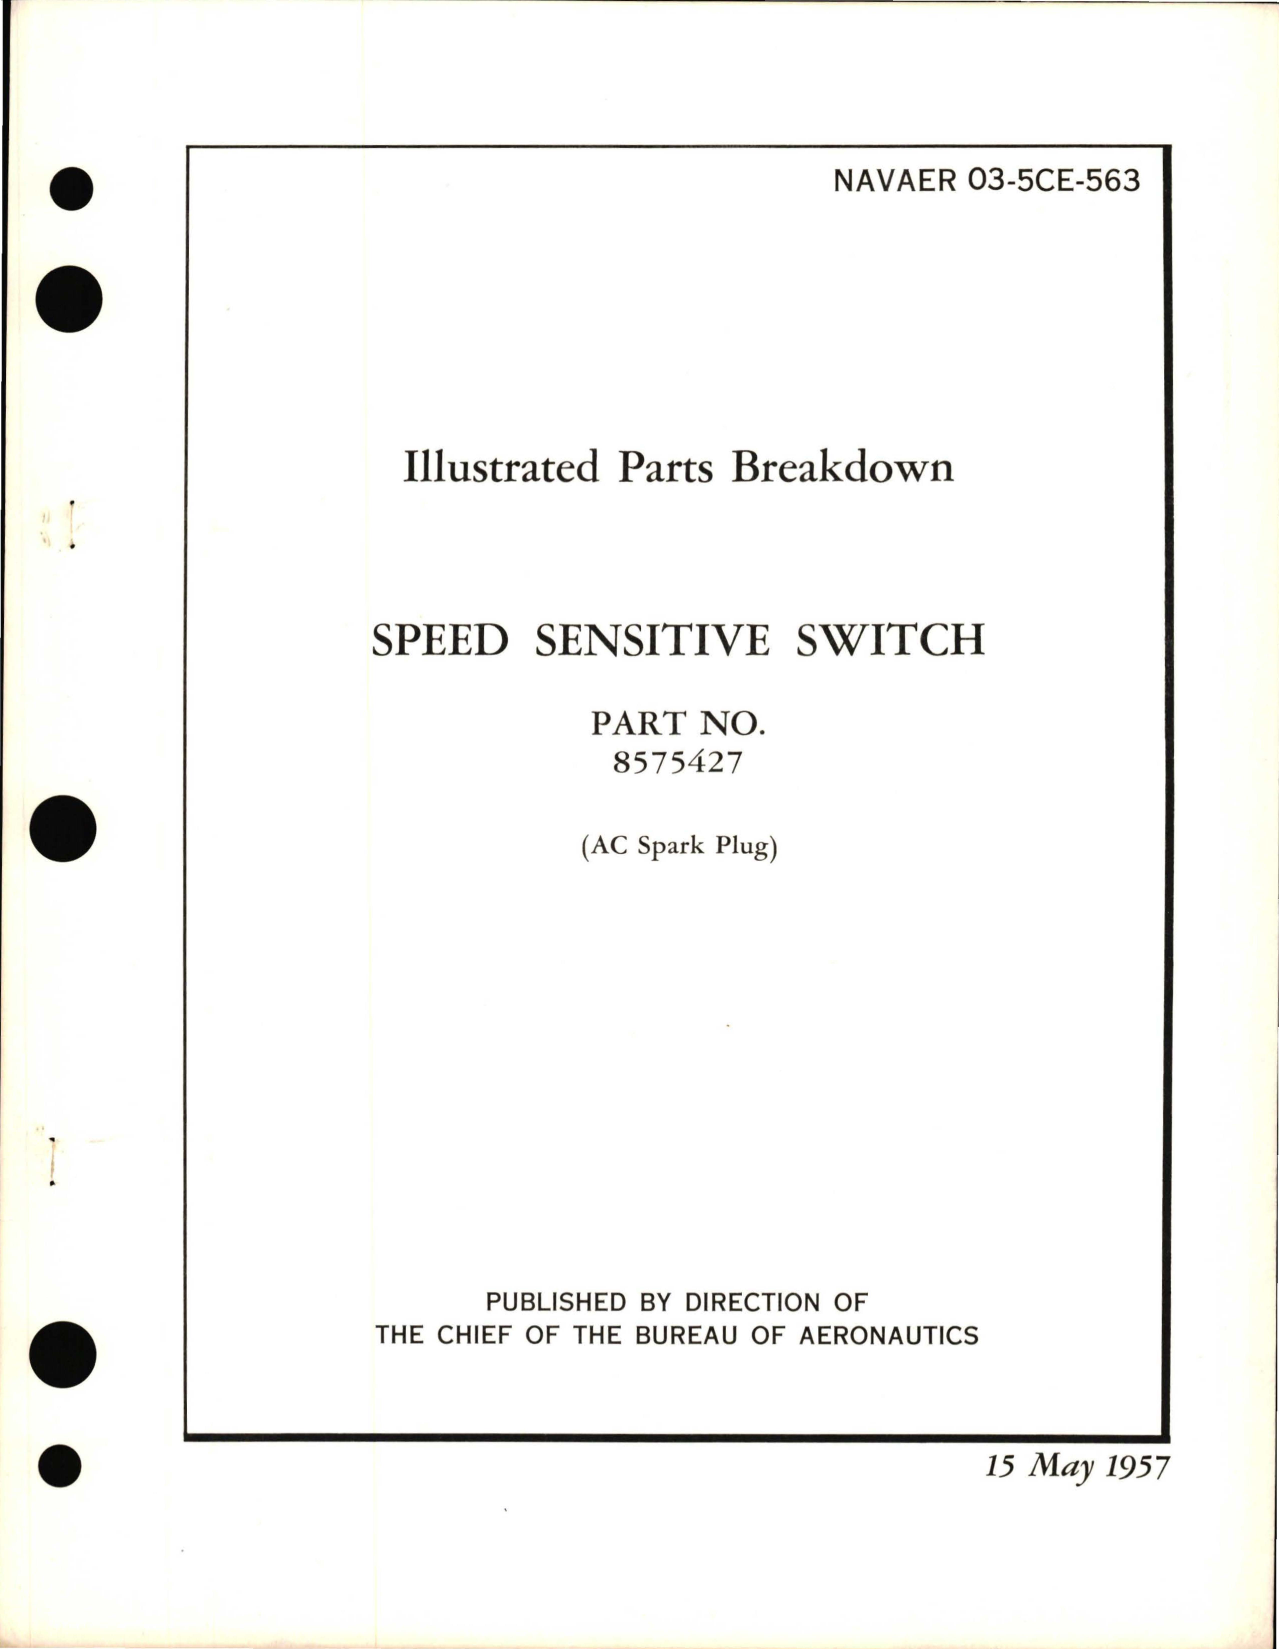 Sample page 1 from AirCorps Library document: Illustrated Parts Breakdown for Speed Sensitive Switch - Part 8575427